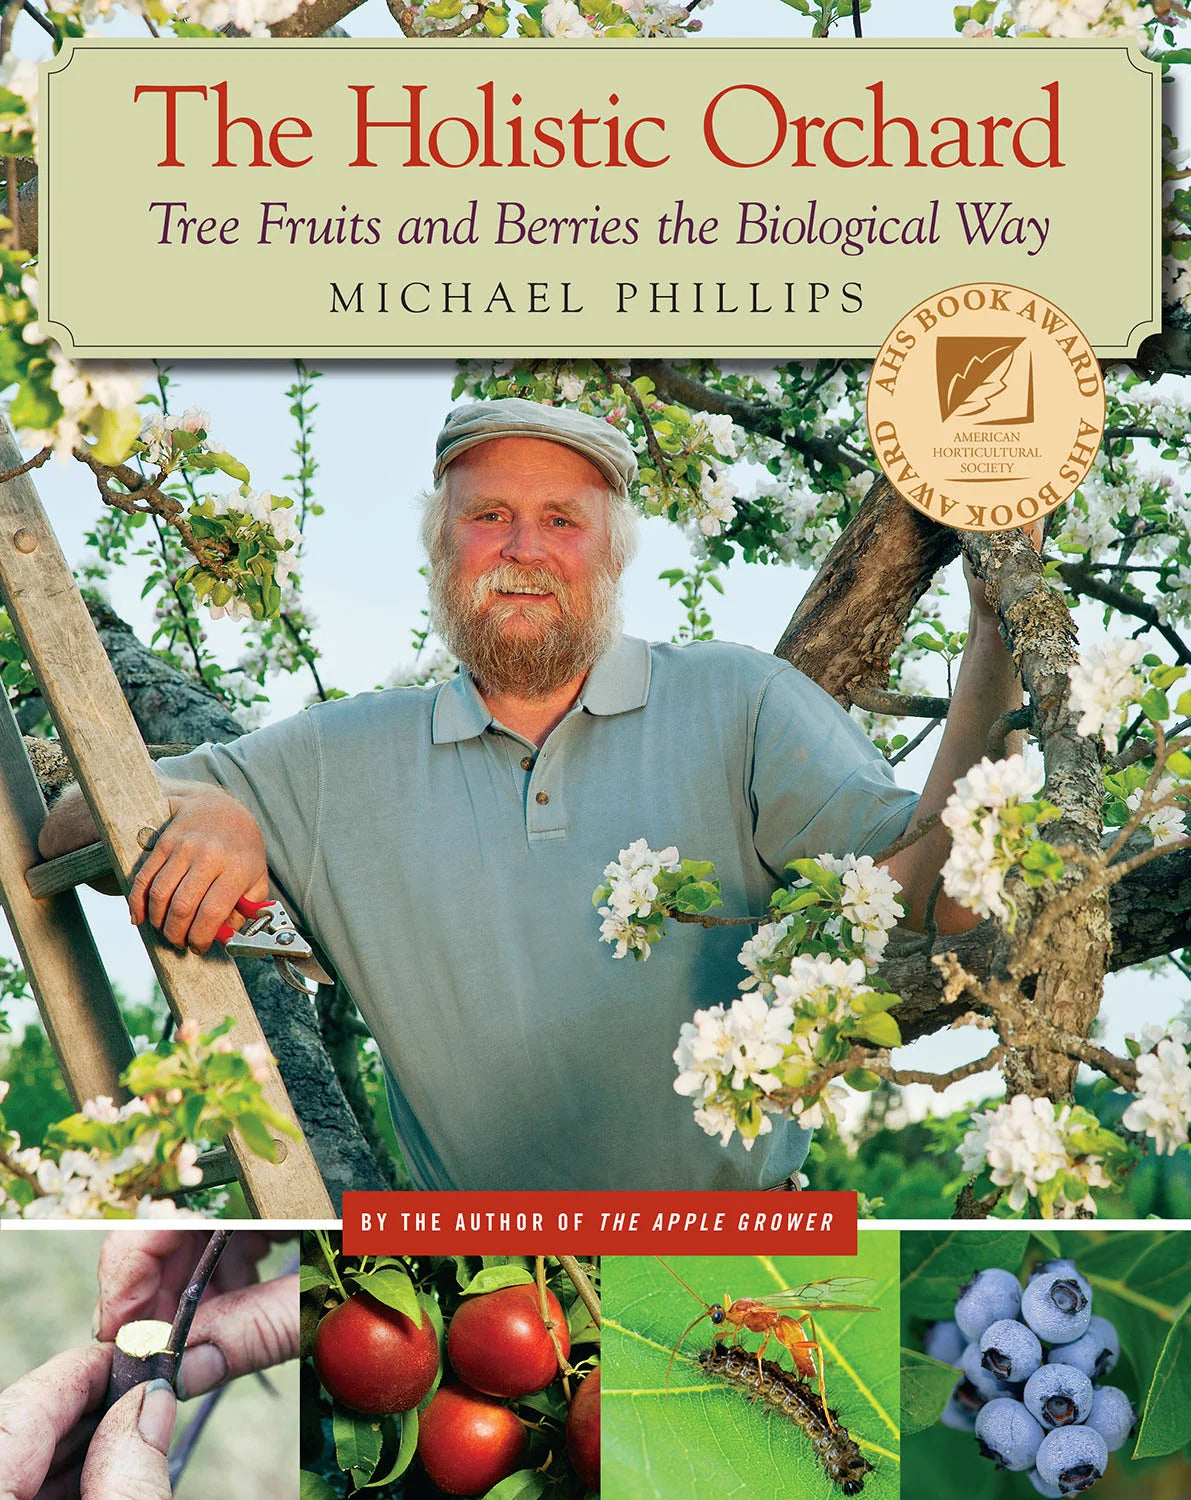 The Holistic Orchard  Tree Fruits and Berries the Biological Way by Michael Phillips